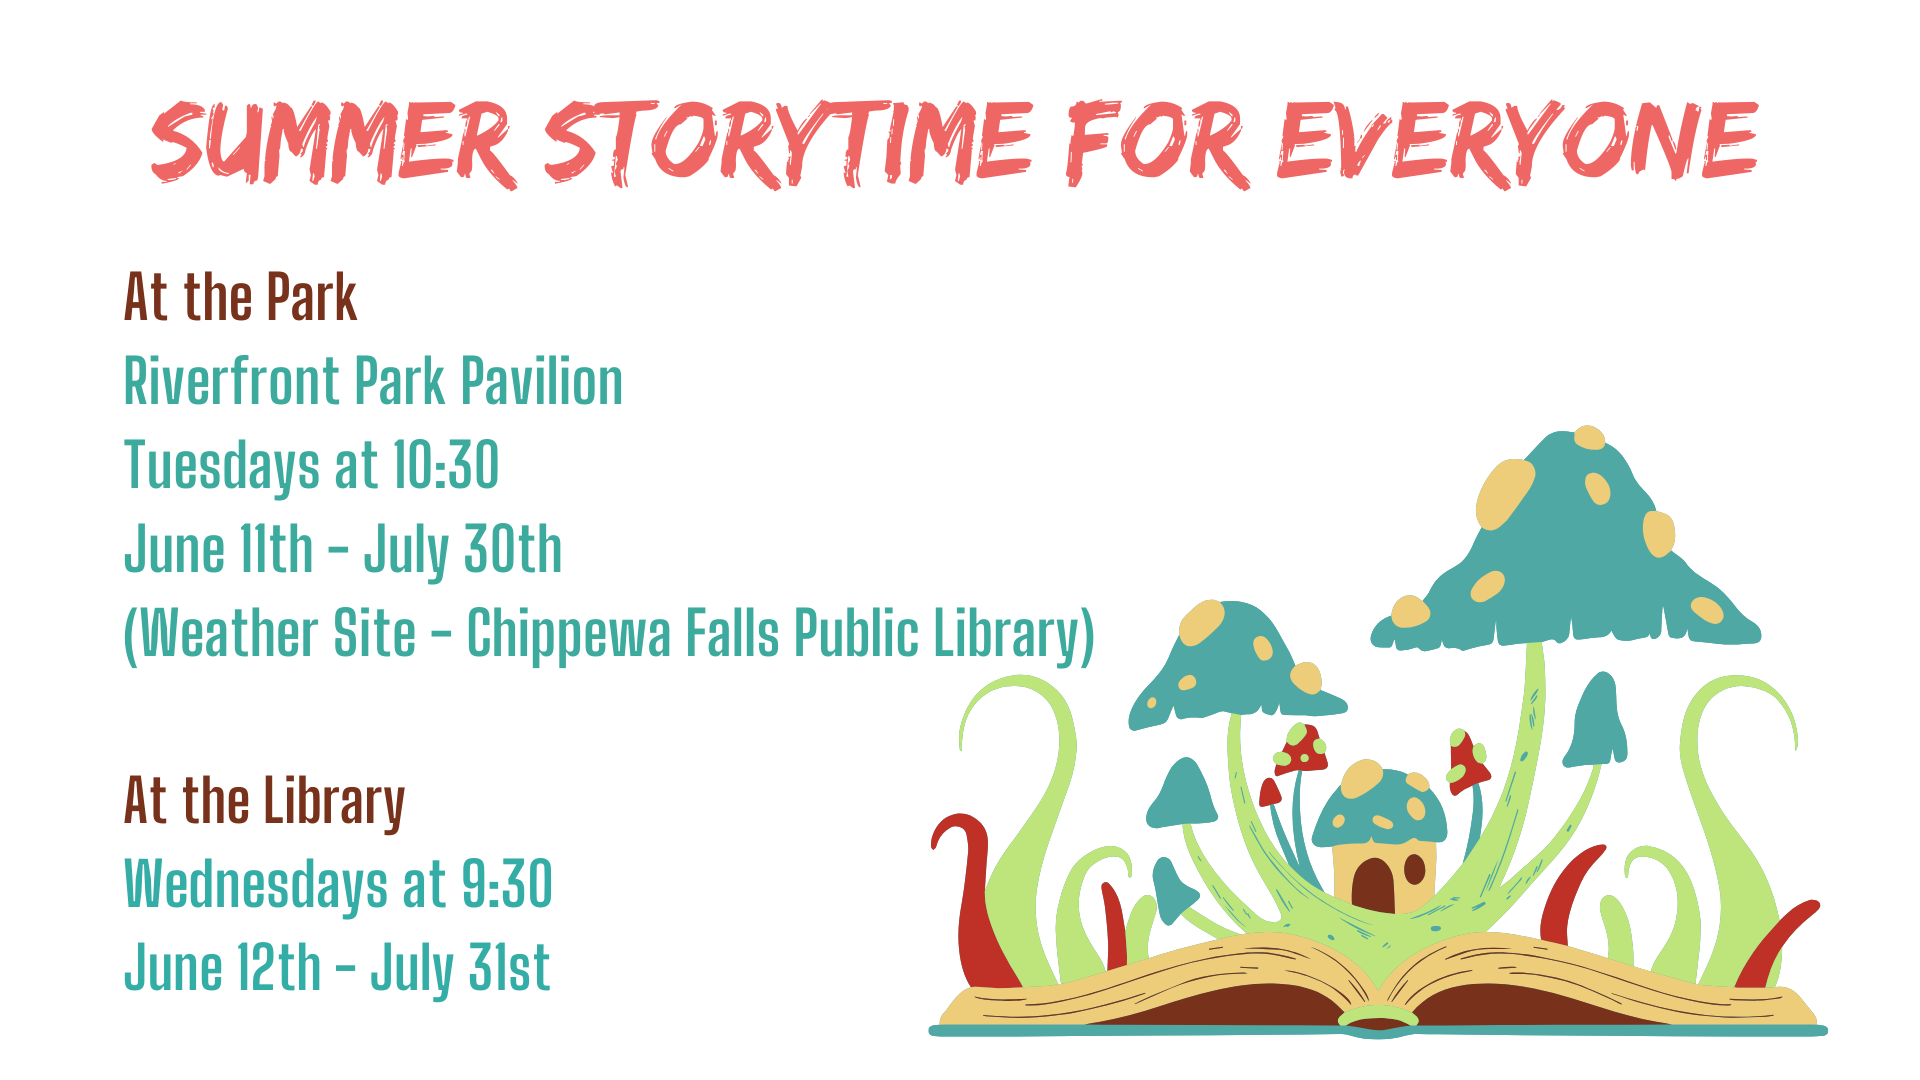 Summer Storytime For Everyone! Poster with mushrooms growing out of a book with green and red stems. Text written on the poster is At the Park, Riverfront Park Pavilion, Tuesdays at 10:30am. June 11-July 30. Weather site at the Chippewa Falls Public Library. At the Library, Wednesdays at 9:30am. June 12 to July 31.